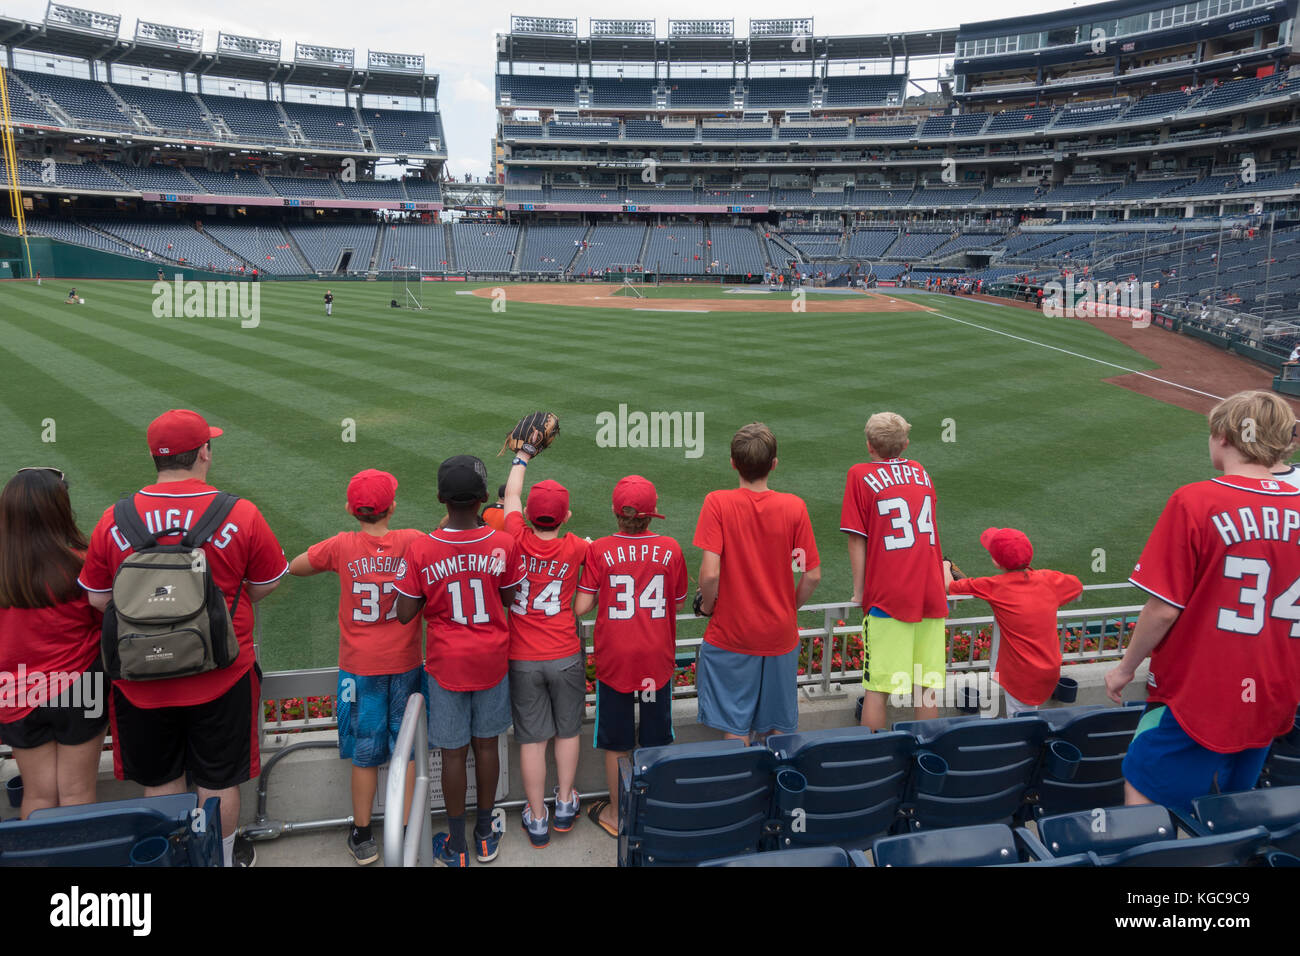 Kids waiting for foul balls during pre-game batting practice, Nationals Park, home of the Washington Nationals, Washington DC, United States. Stock Photo